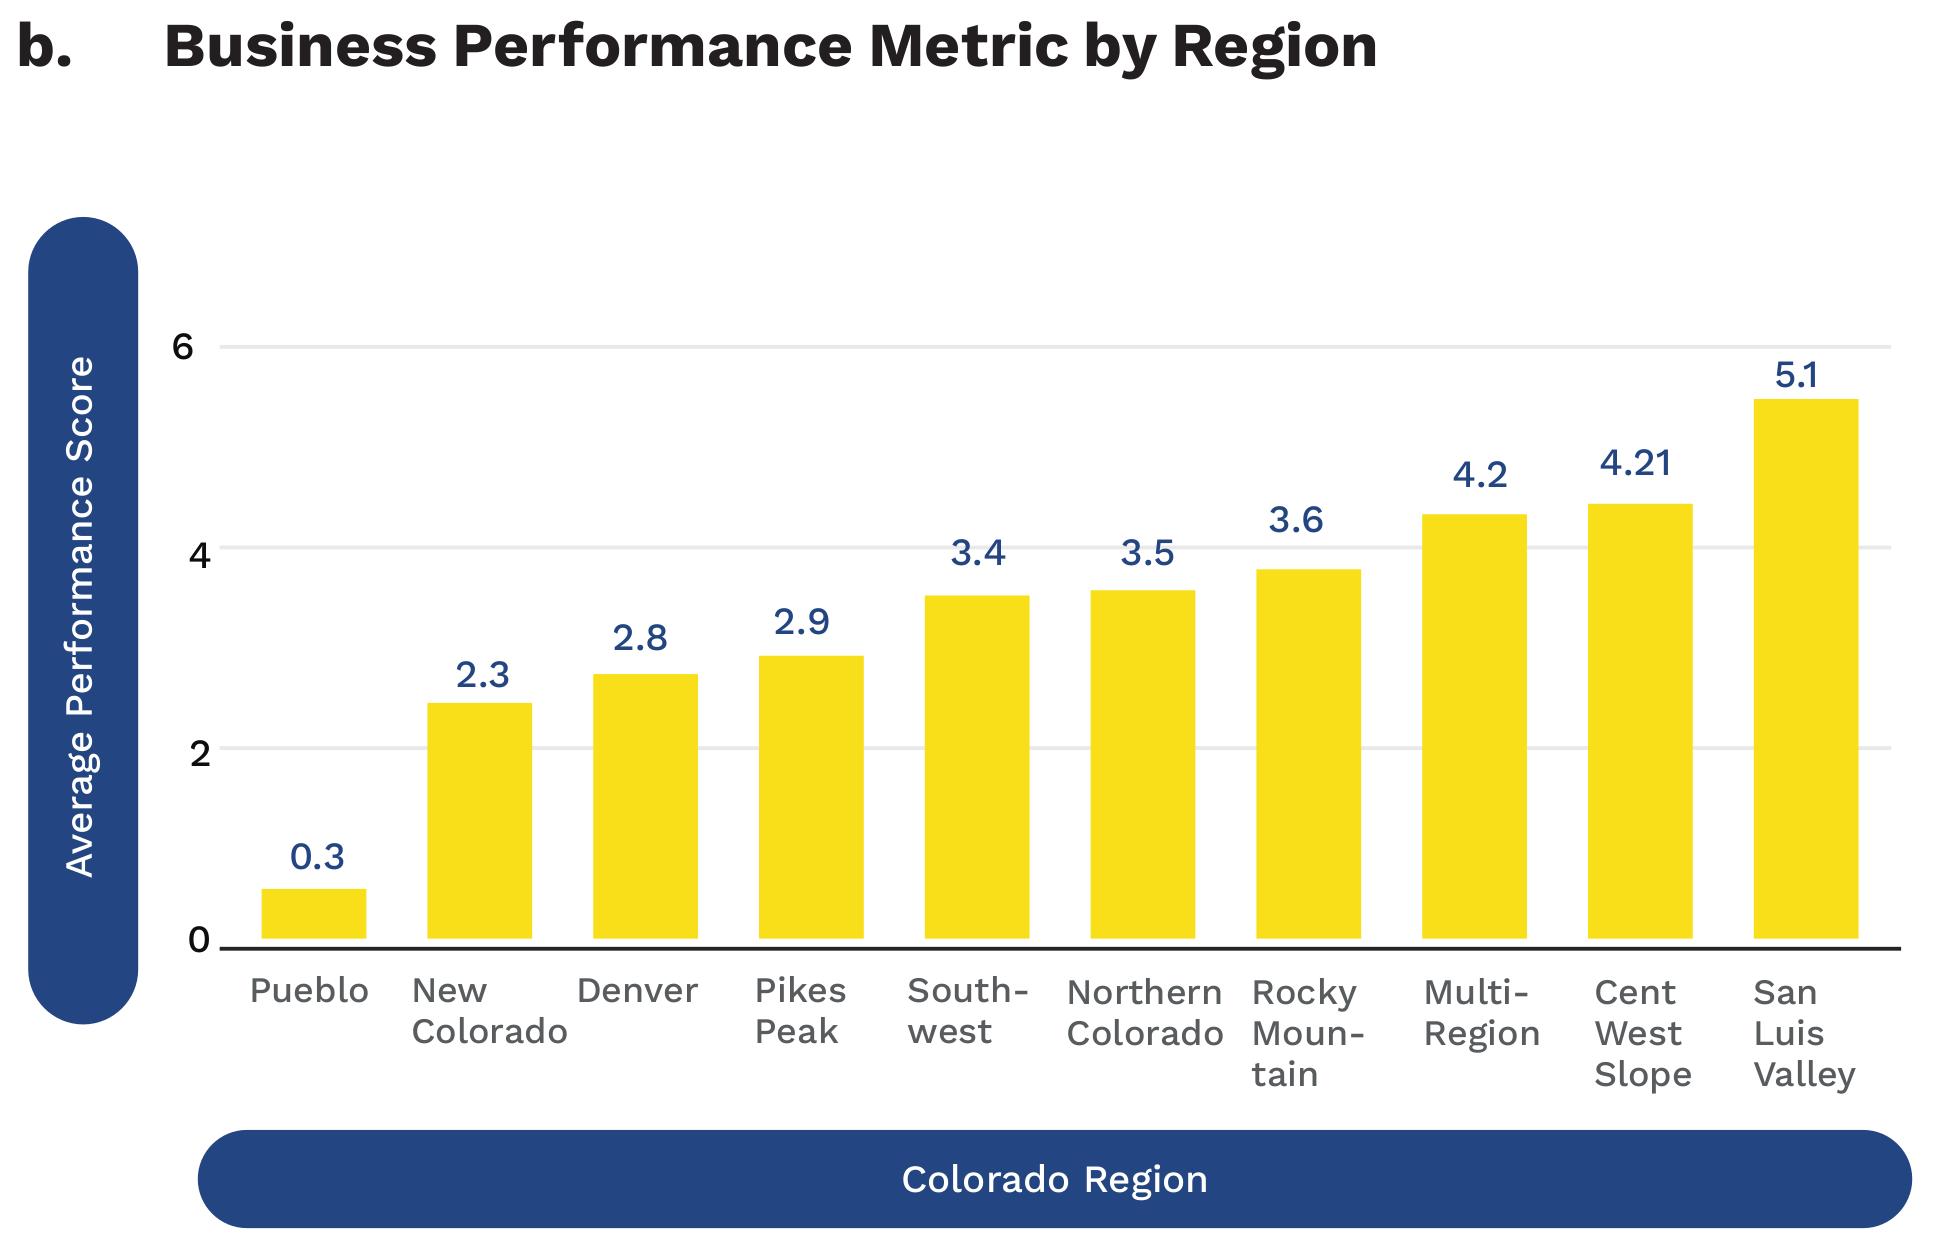 Business Performance Metric by Region